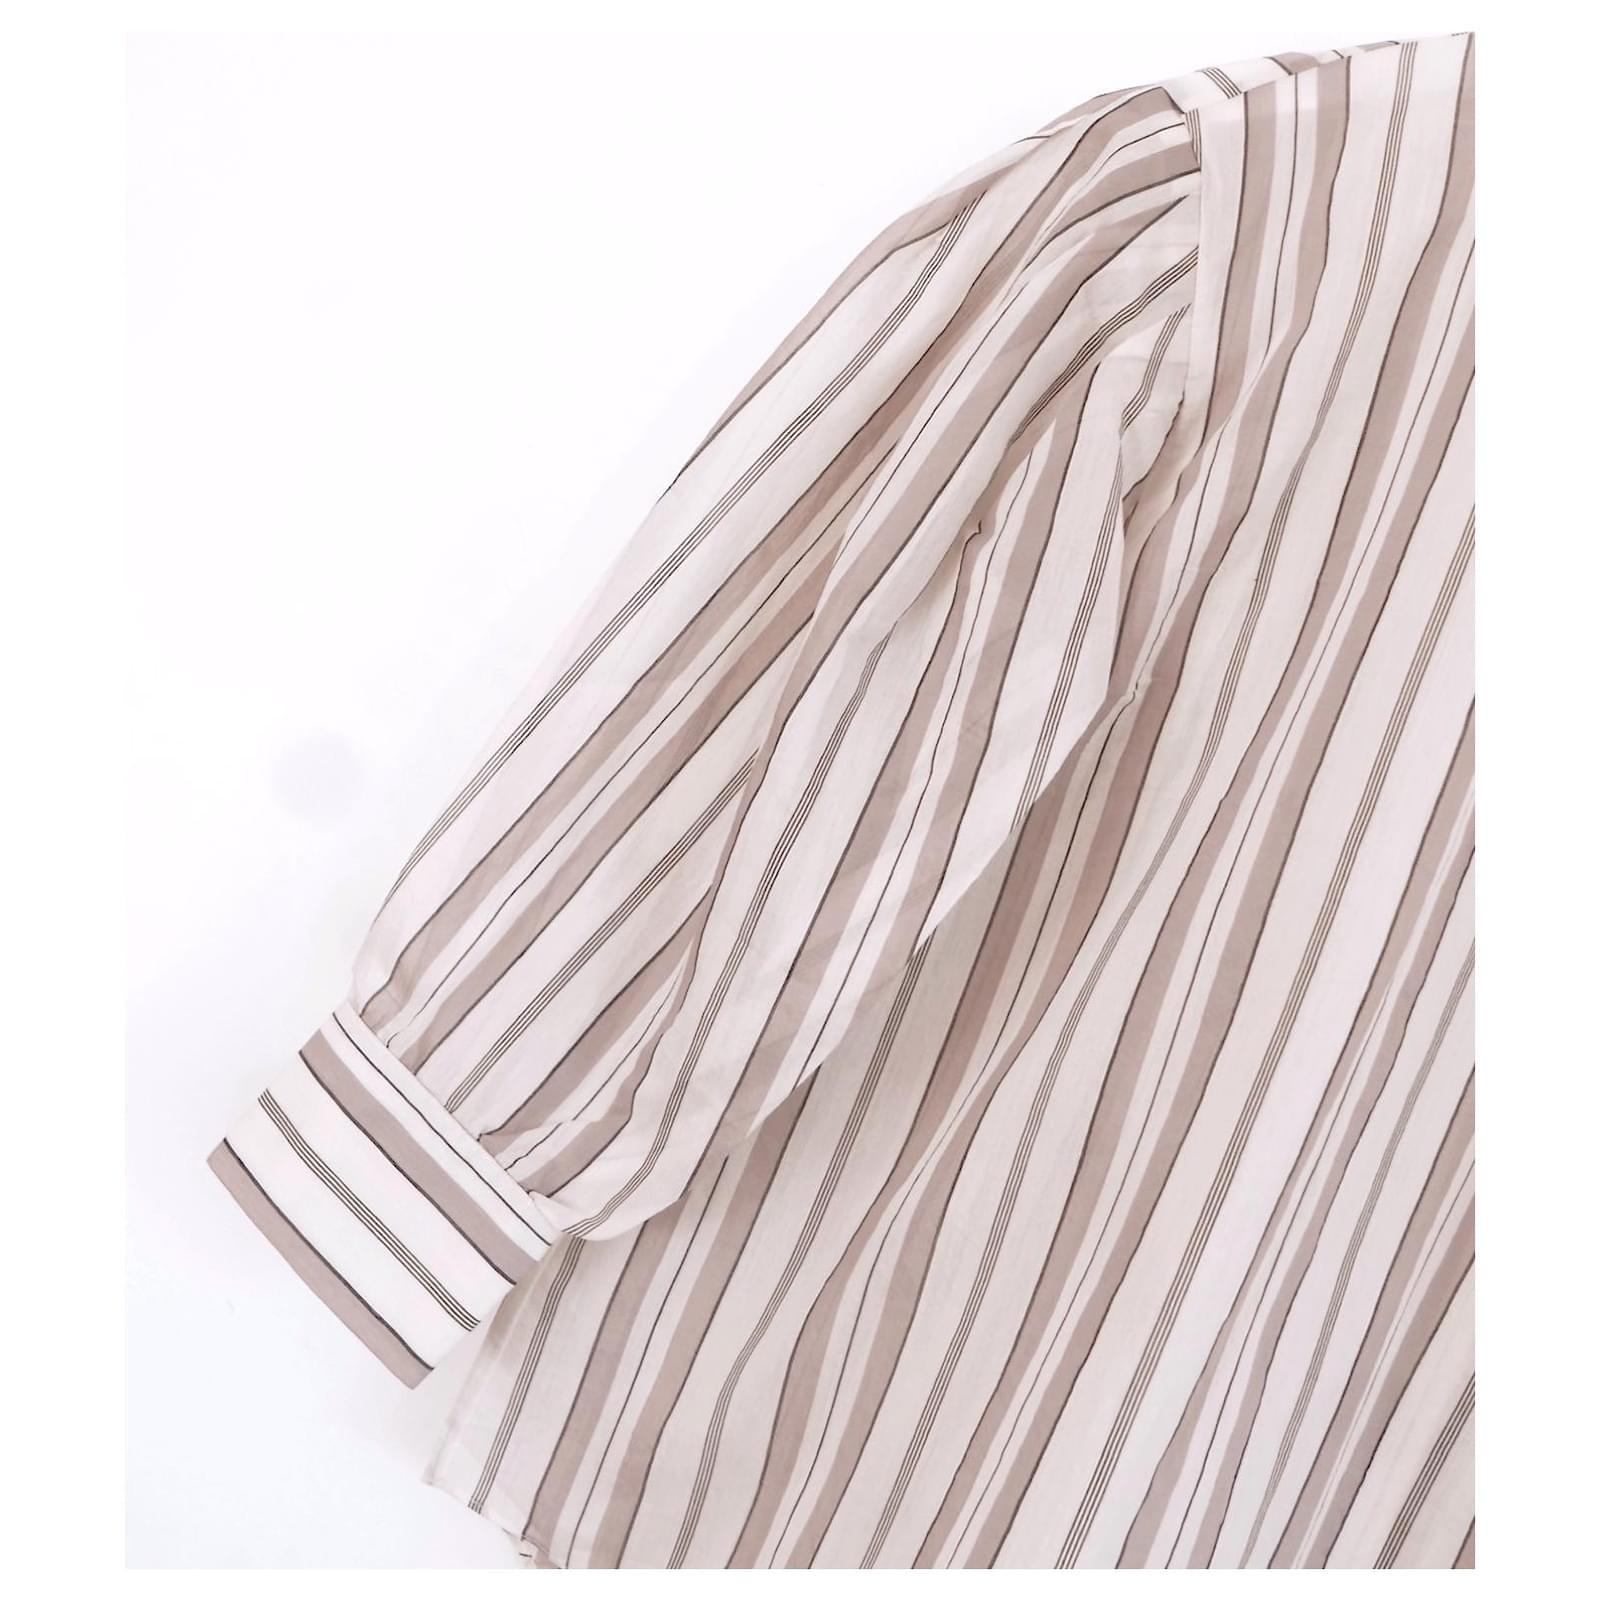 Ultra luxe Brunello Cucinelli striped puffed sleeve blouse. bought for £1500 and new with tag. Made from beige, brown and cream striped cotton and silk voile with super delicate signature bead embellishment to the back of the neck. It has a loose